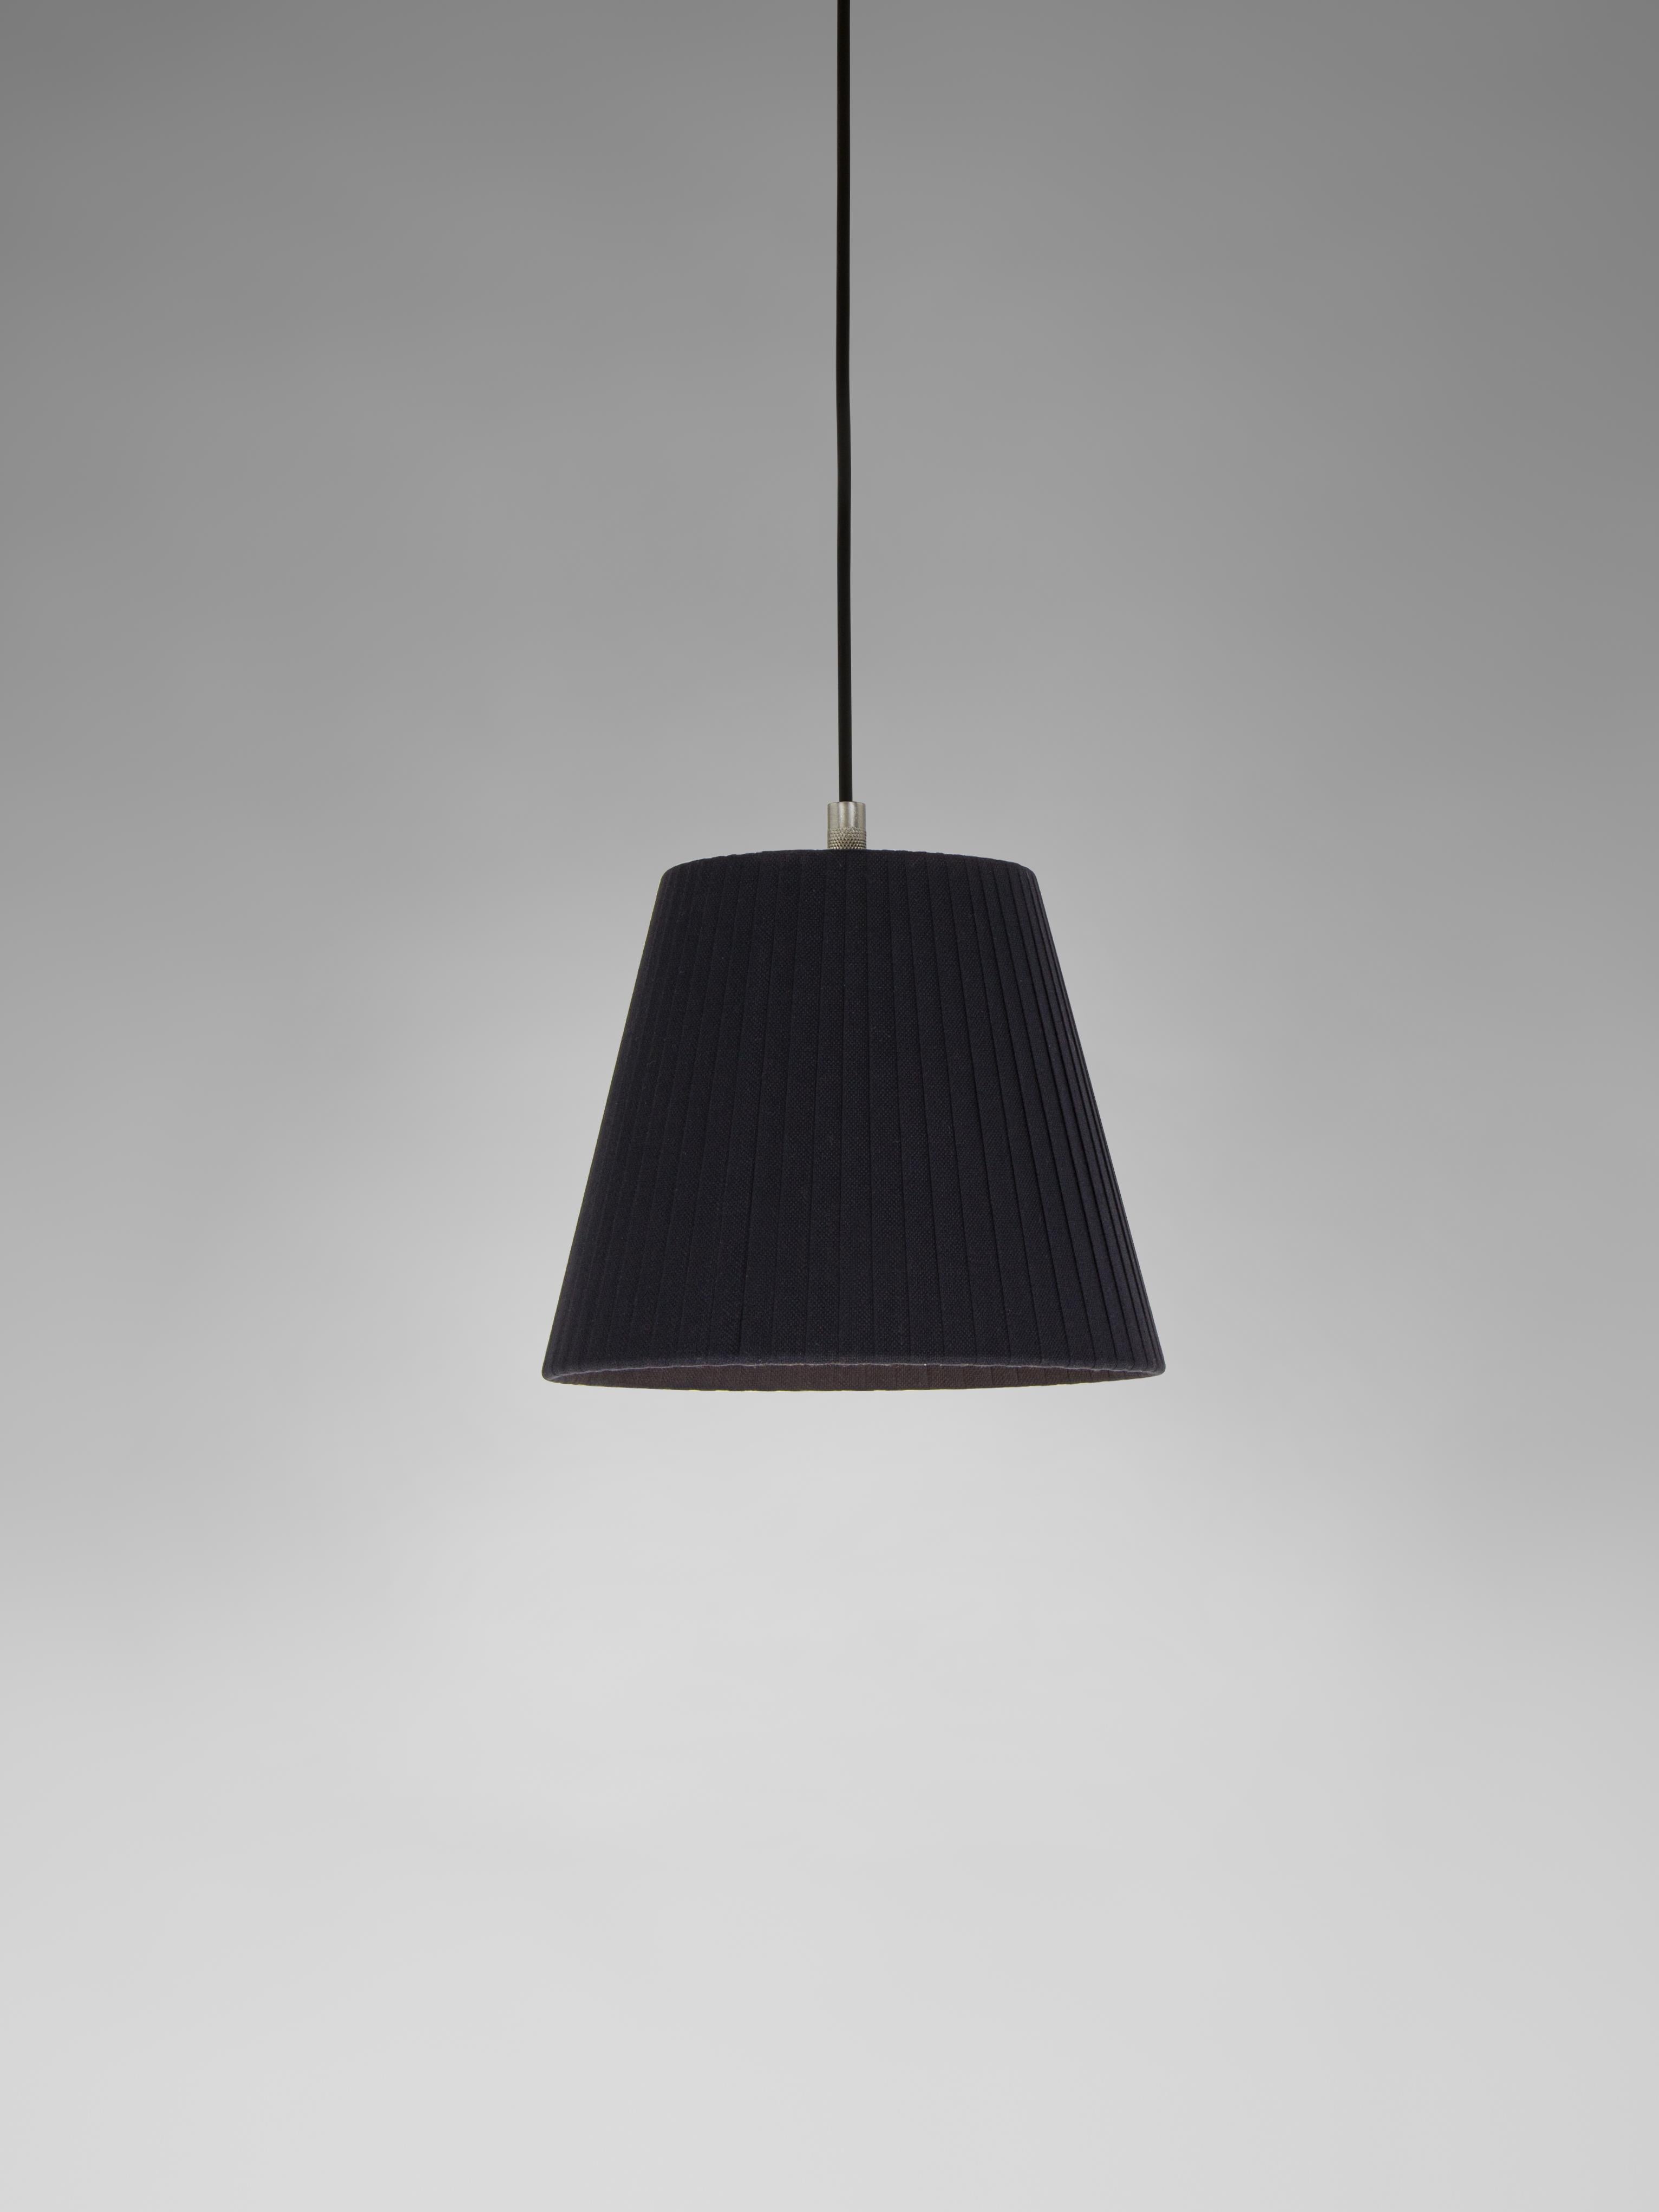 Black Sísísí Cónicas PT1 pendant lamp by Santa & Cole
Dimensions: D 20 x H 16 cm
Materials: Metal, ribbon.
Available in other colors.

The conical shape group has multiple finishes and sizes. It consists of four sizes: PT1, MT1, GT1 and GT3,